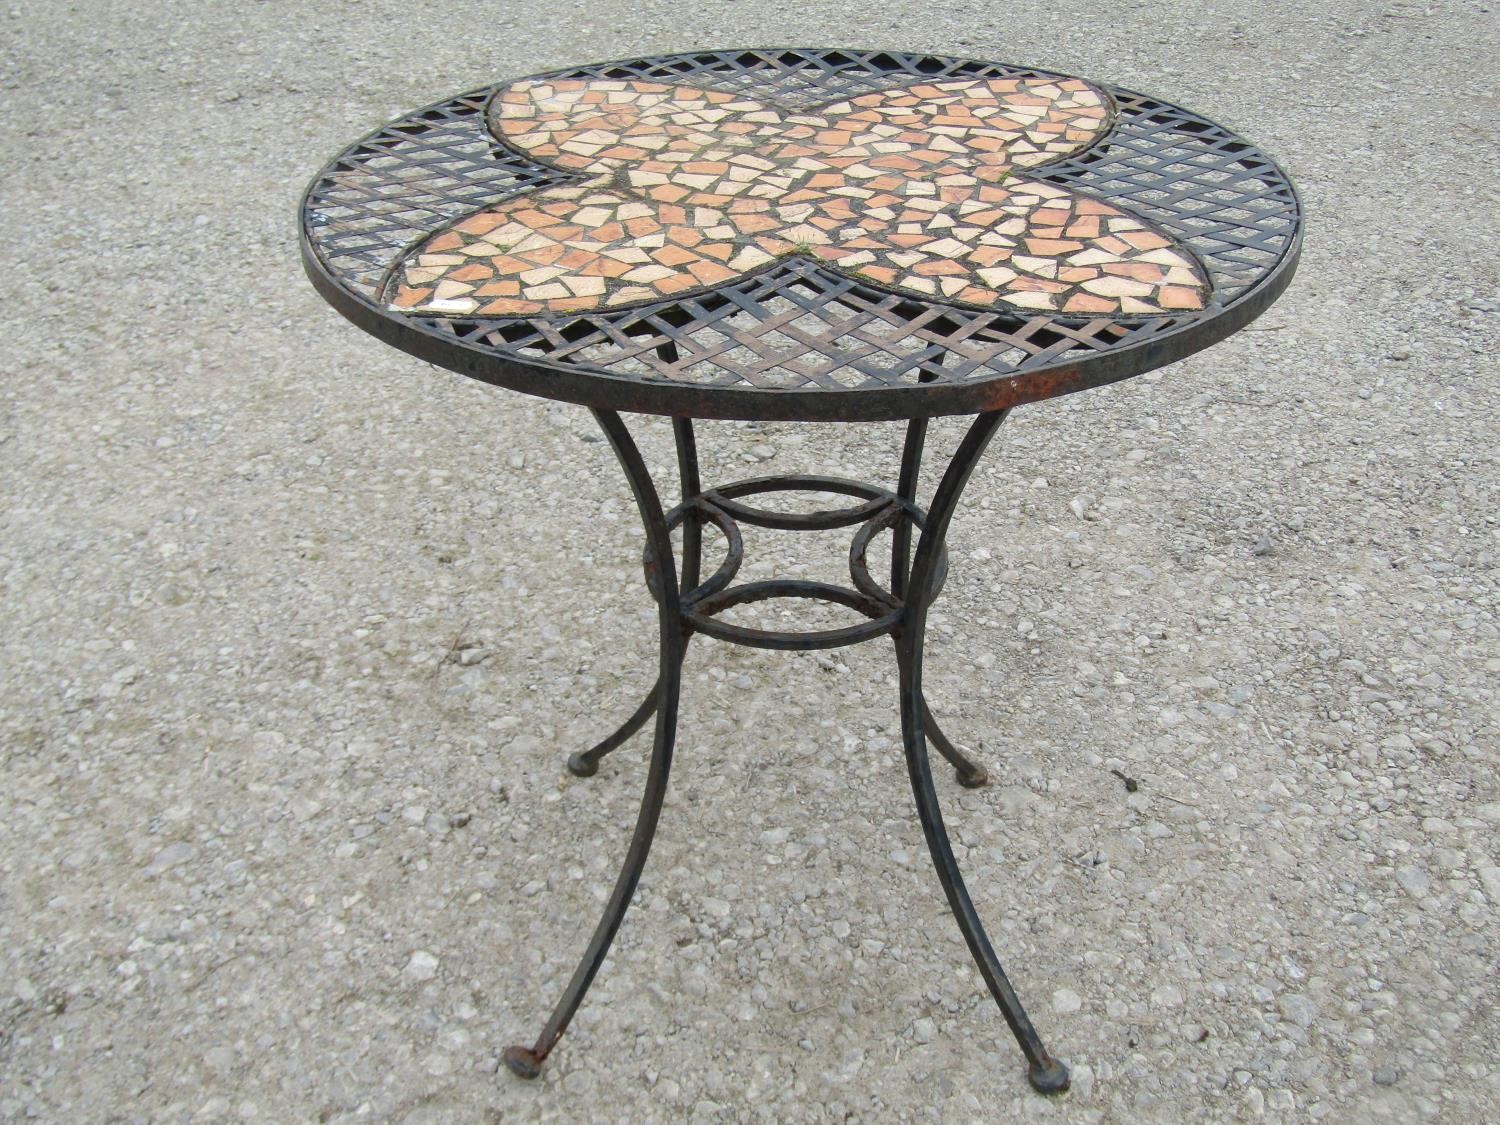 A heavy gauge three piece iron work Bistro table and two chairs with mosaic panels, lattice and - Image 4 of 5